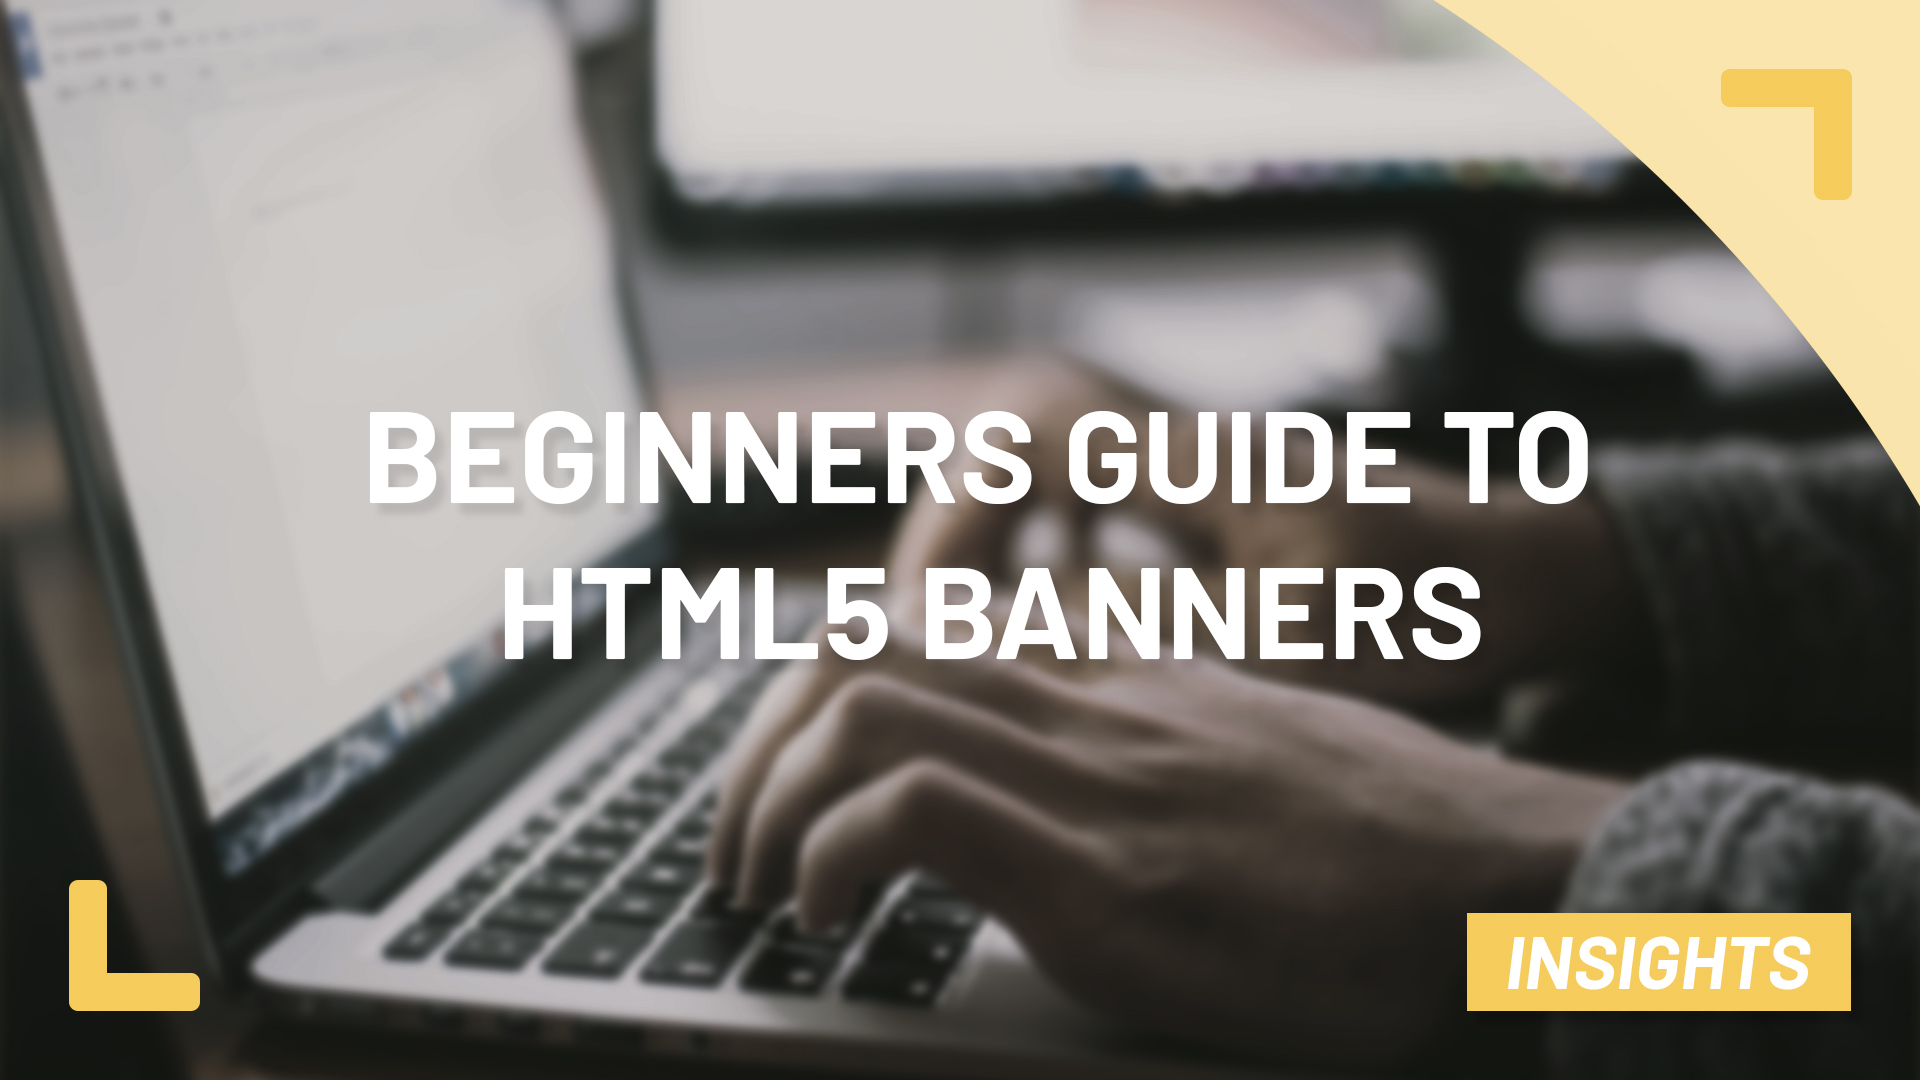 A complete beginner’s guide to HTML5 banners